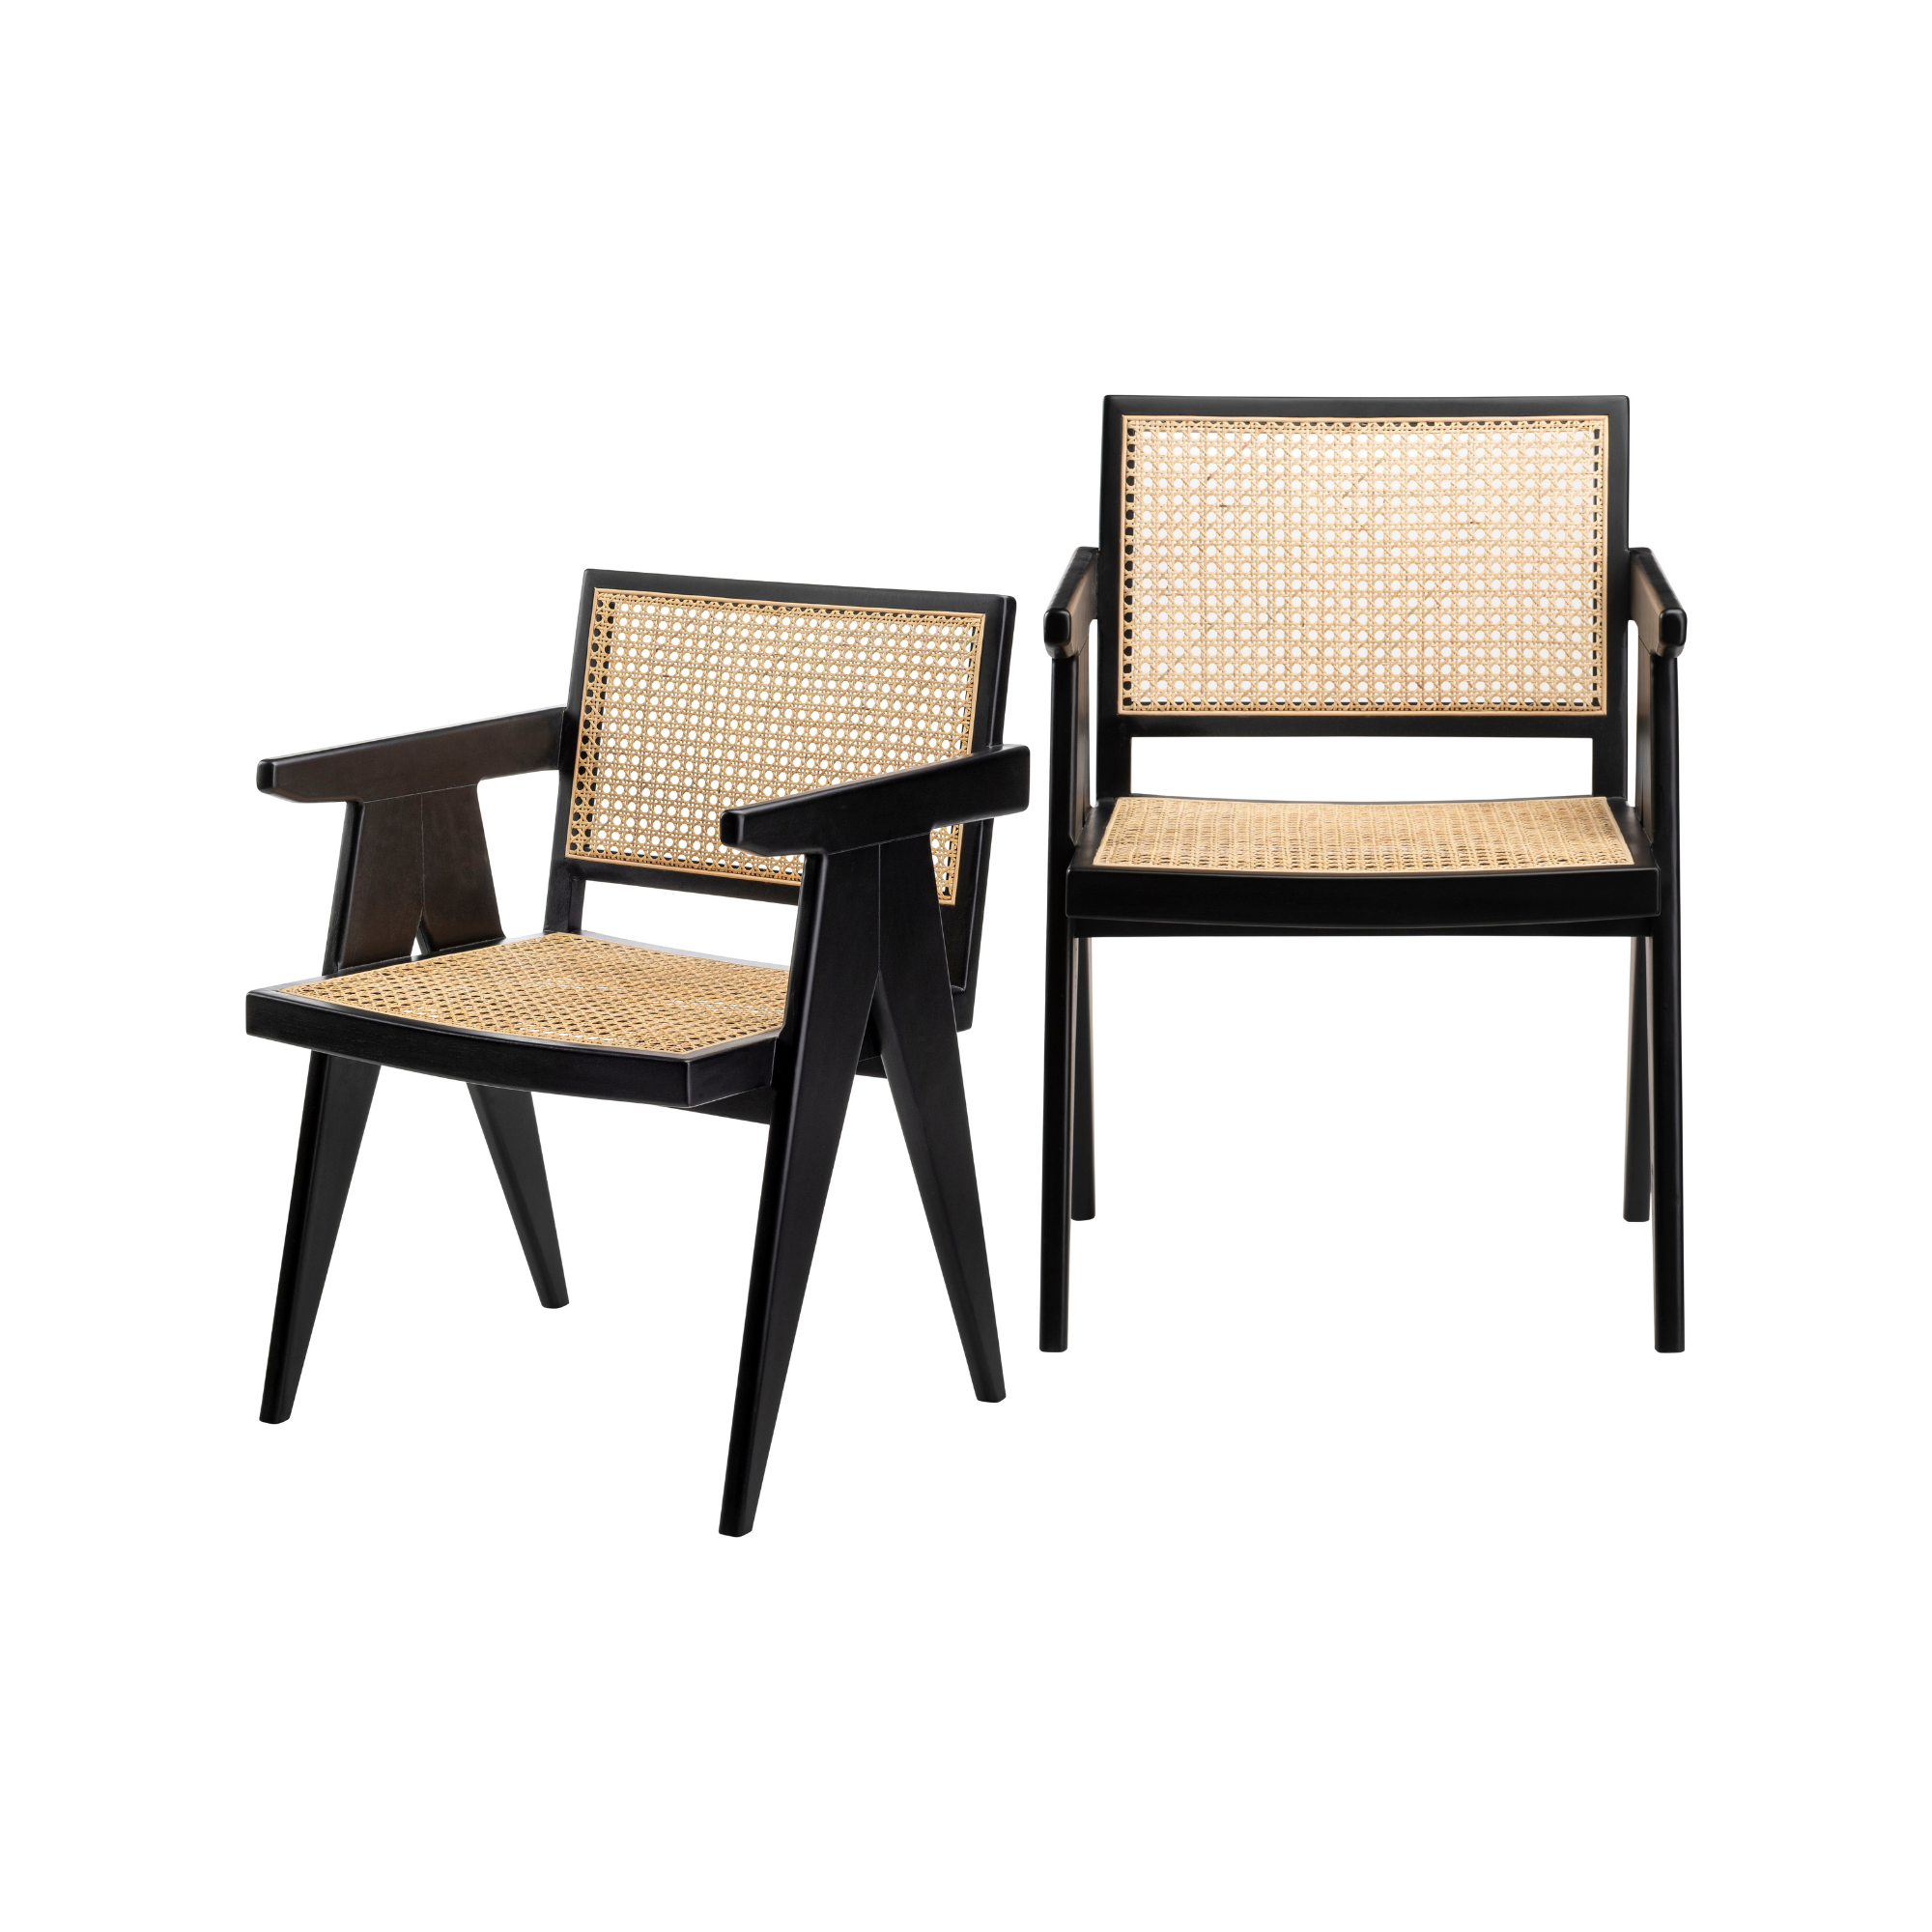 Hailey Dining Chair, Set of 2